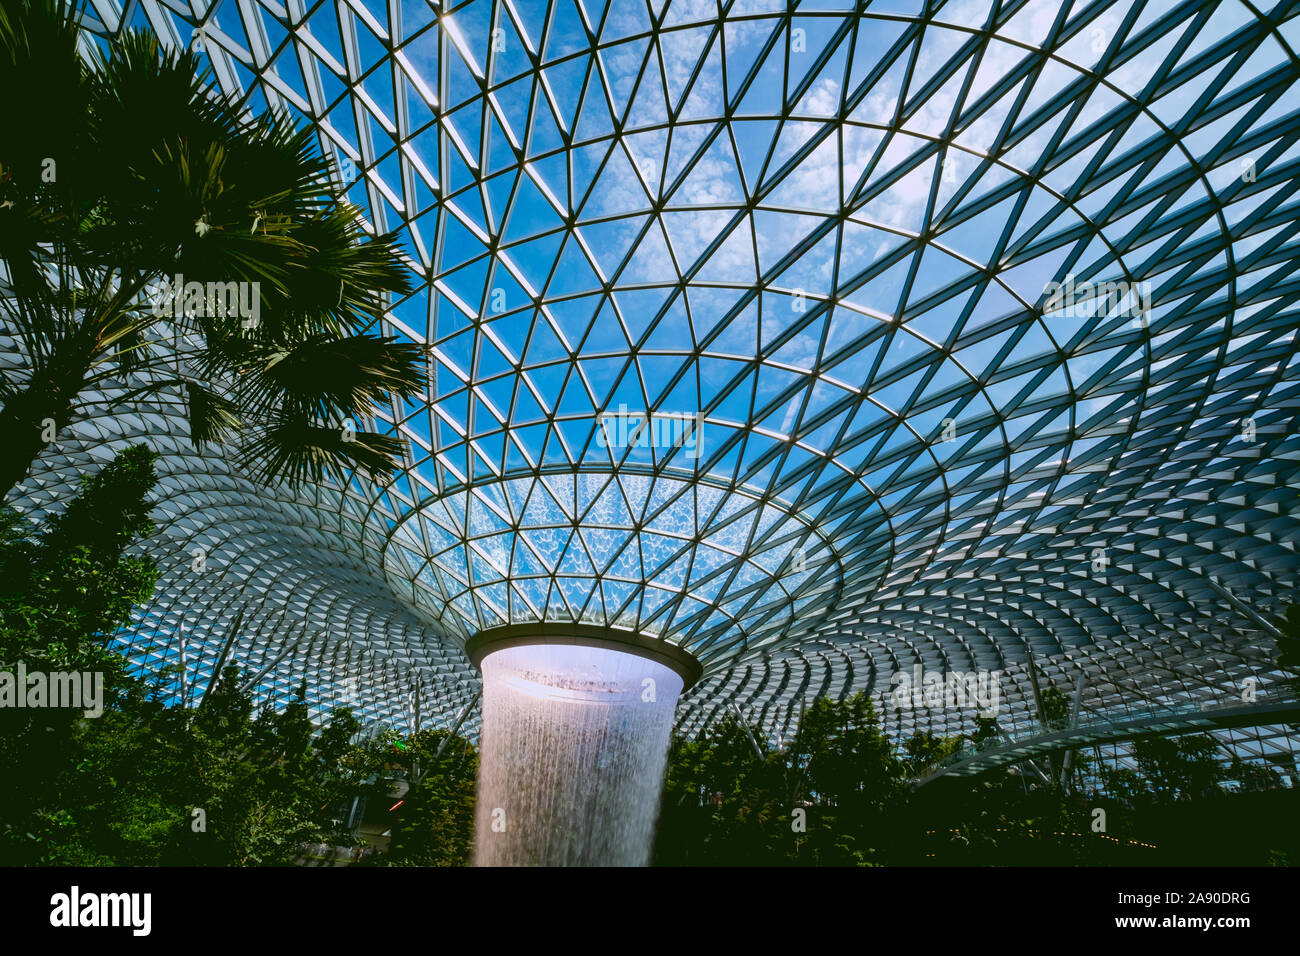 Roof glass panels are one of Jewel Changi Airport's architectural features, to allow day light transmission for energy savings. Stock Photo